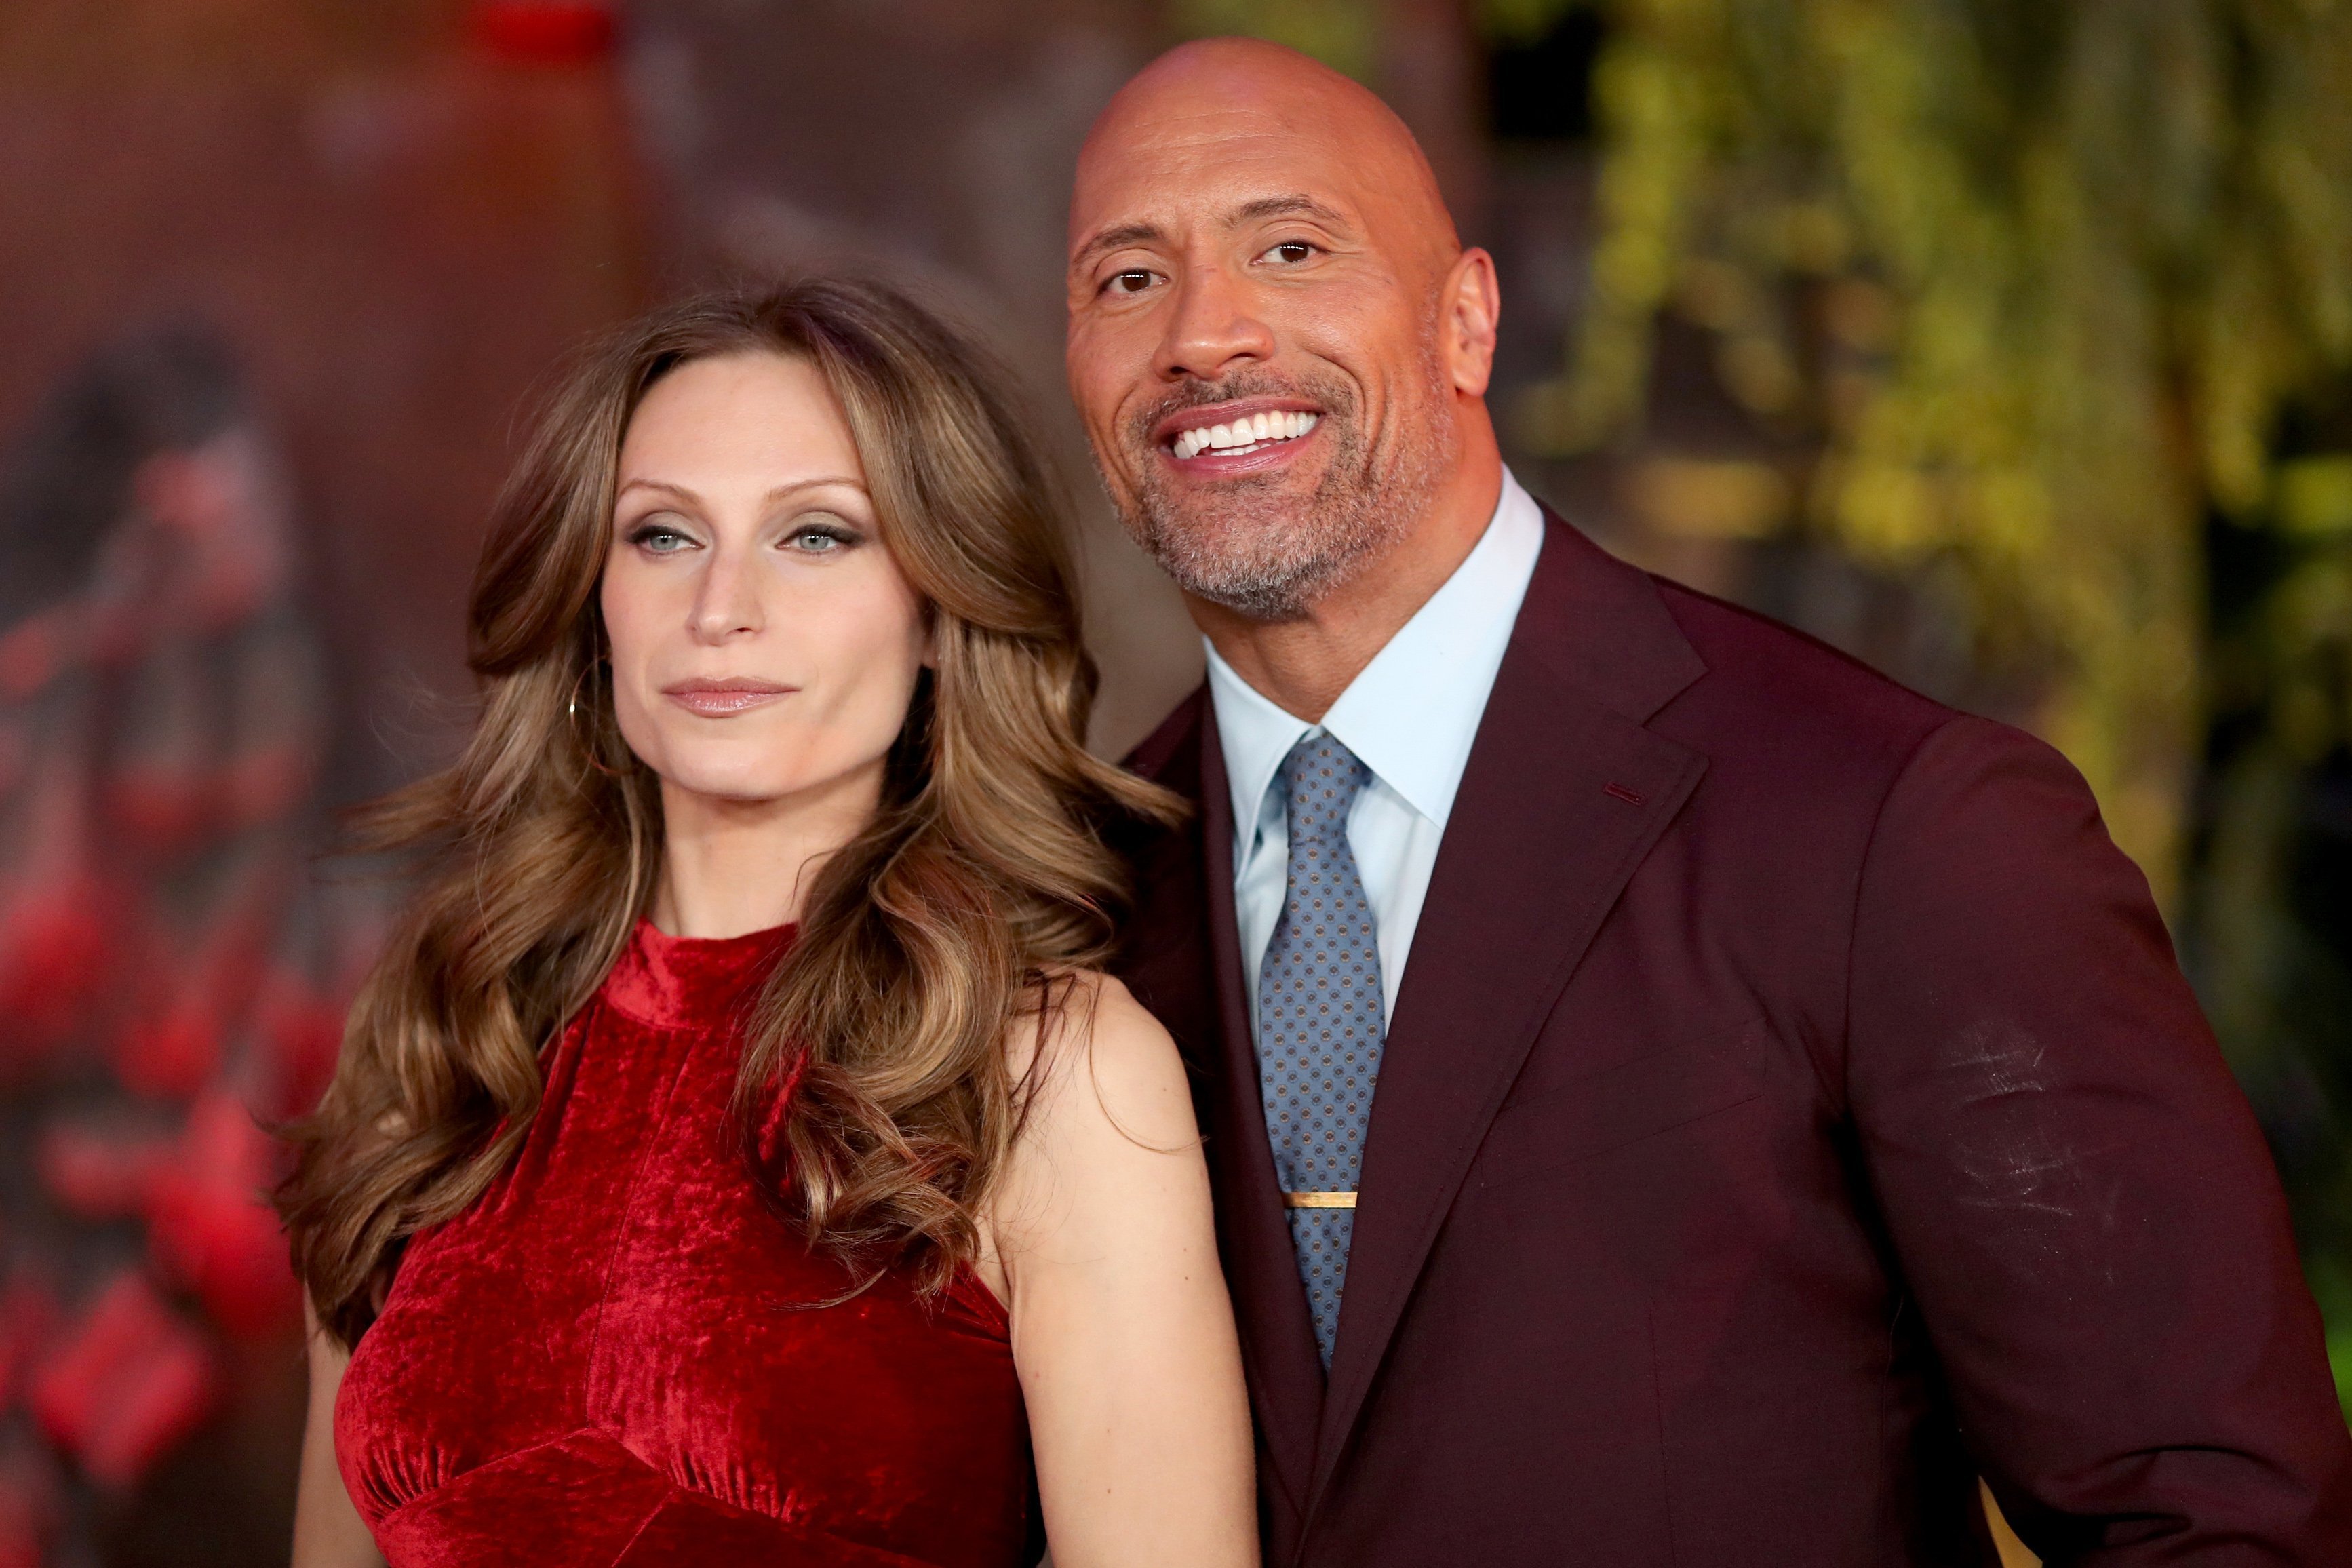 Lauren Hashian and Dwayne Johnson attend the premiere of "Jumanji: Welcome To The Jungle" on December 11, 2017 in Hollywood, California. | Source: Getty Images.